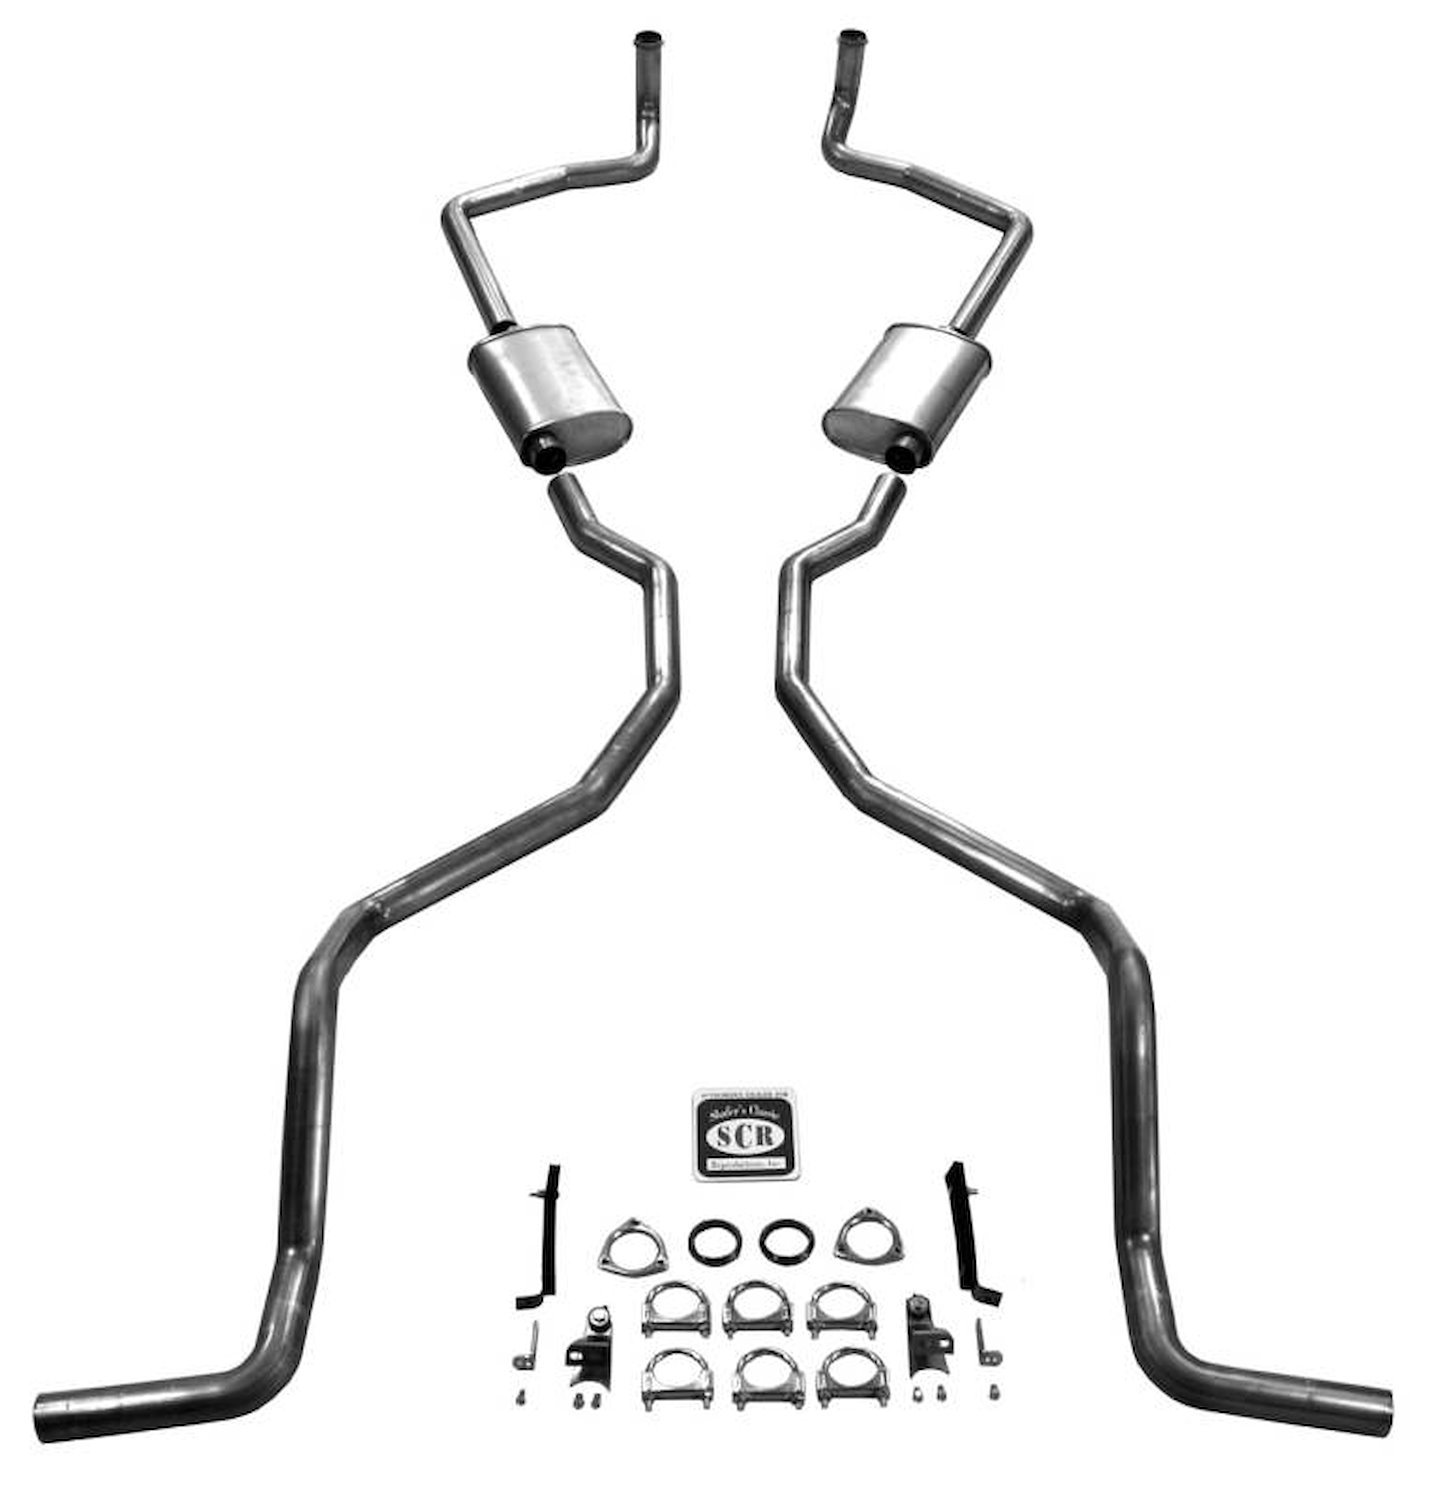 73073 1959 El Camino & SW exc. 9-Passenger 348 Dual Exhaust System w/ 2-1/2 in. Exhaust pipes & 2-1/2 in. Tailpipes